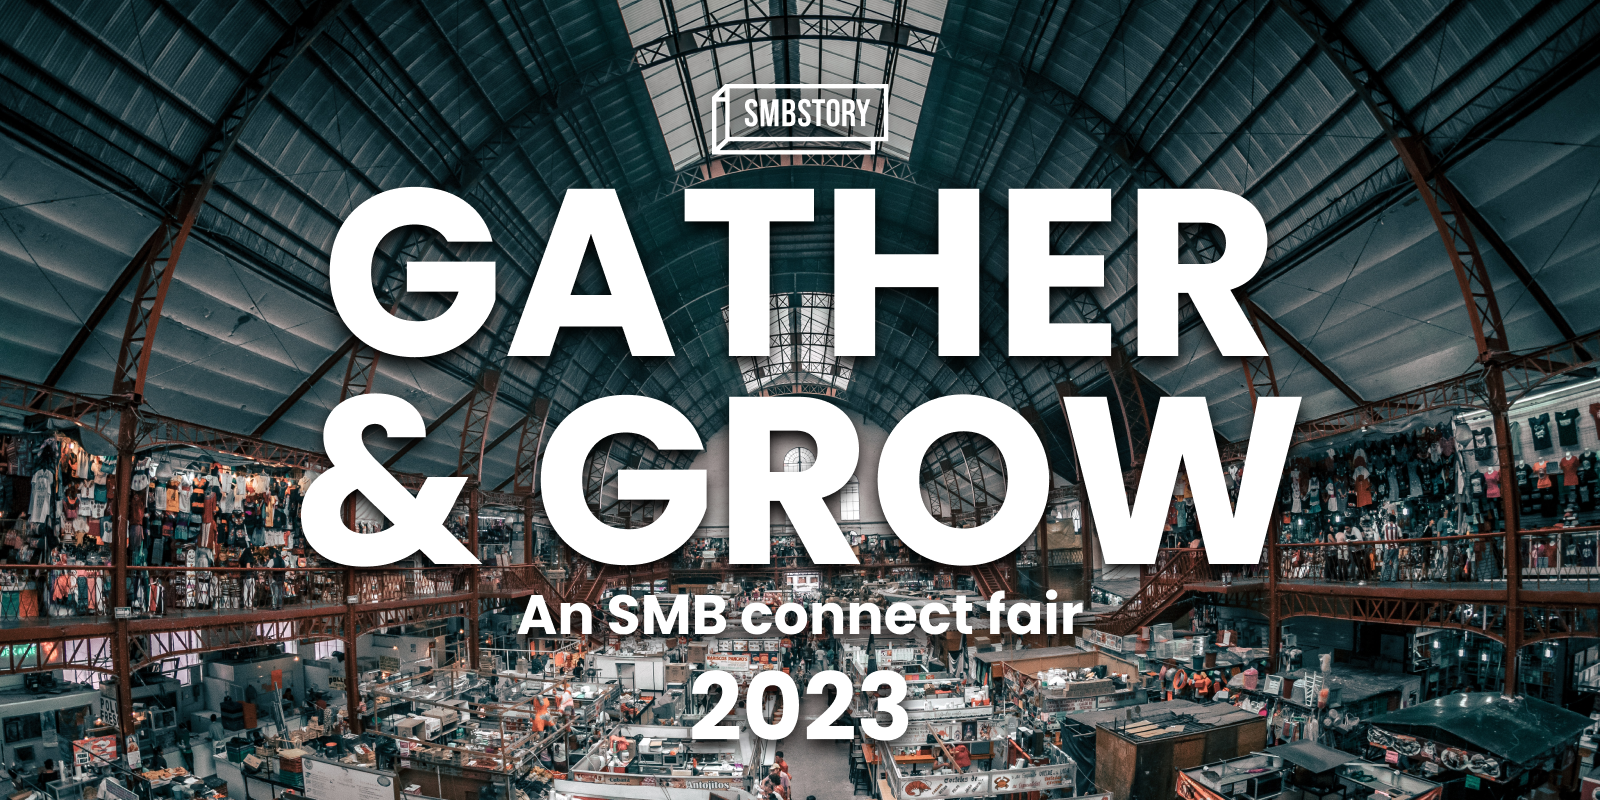 Gather & Grow at SMB Connect Fair to unleash the power of micro and small businesses